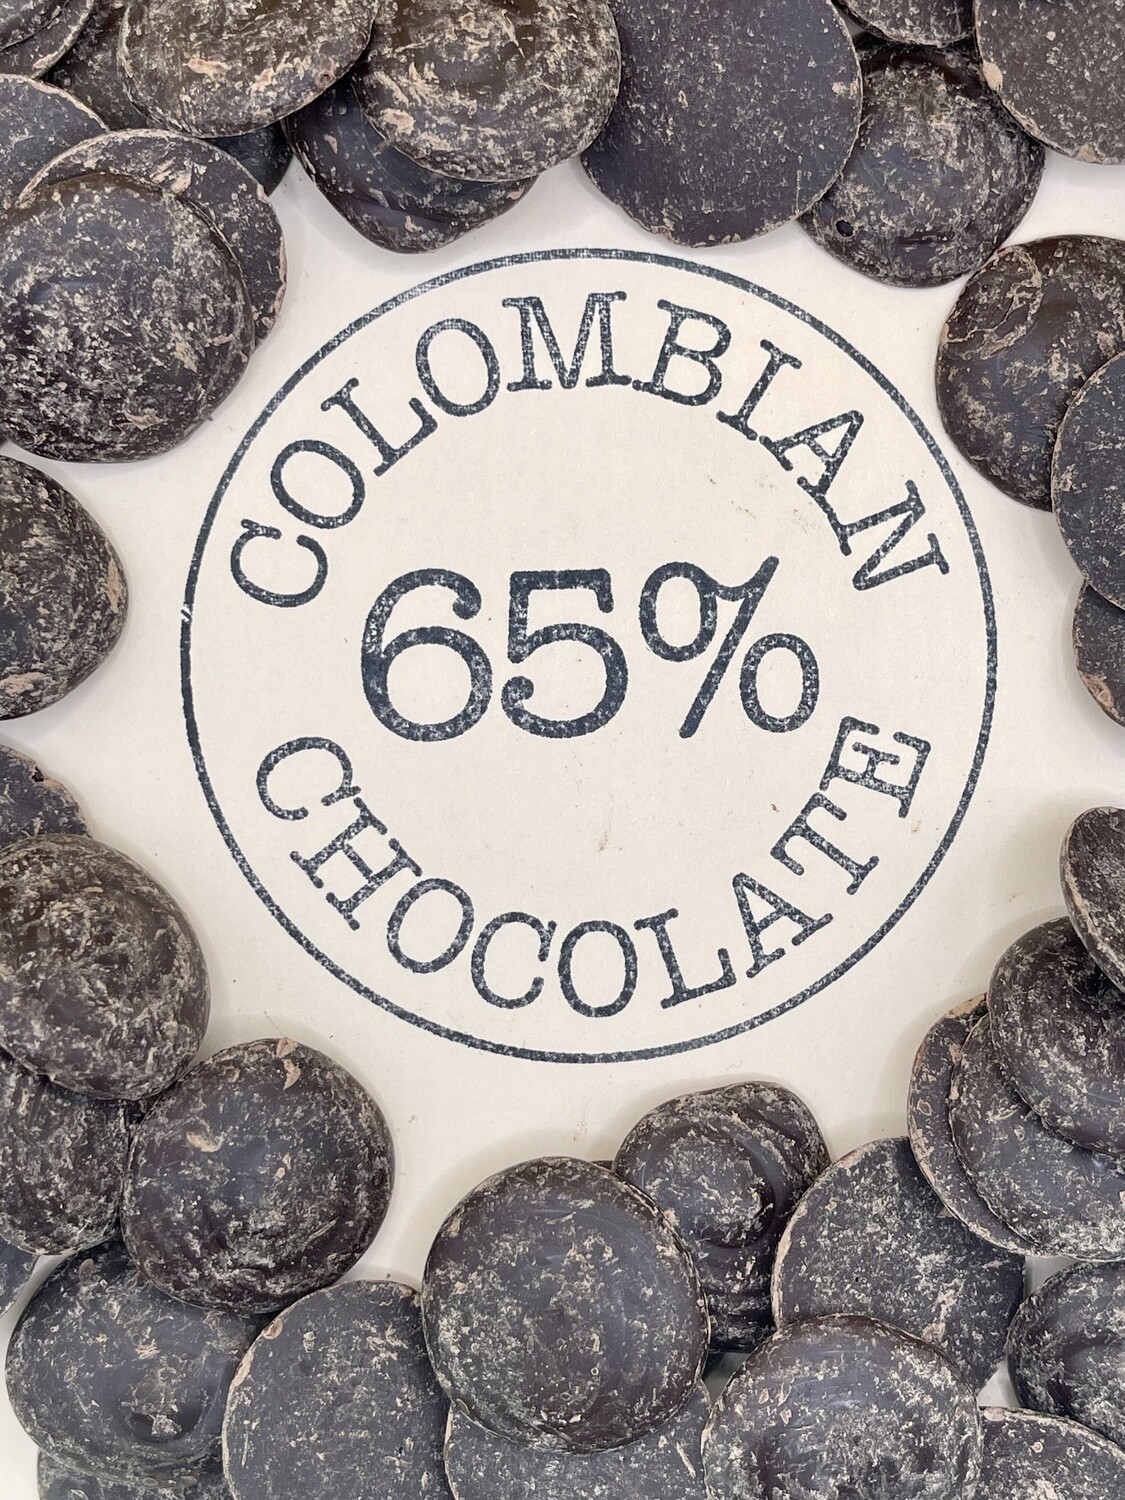 1 pound - 65% Colombian Chocolate Discs